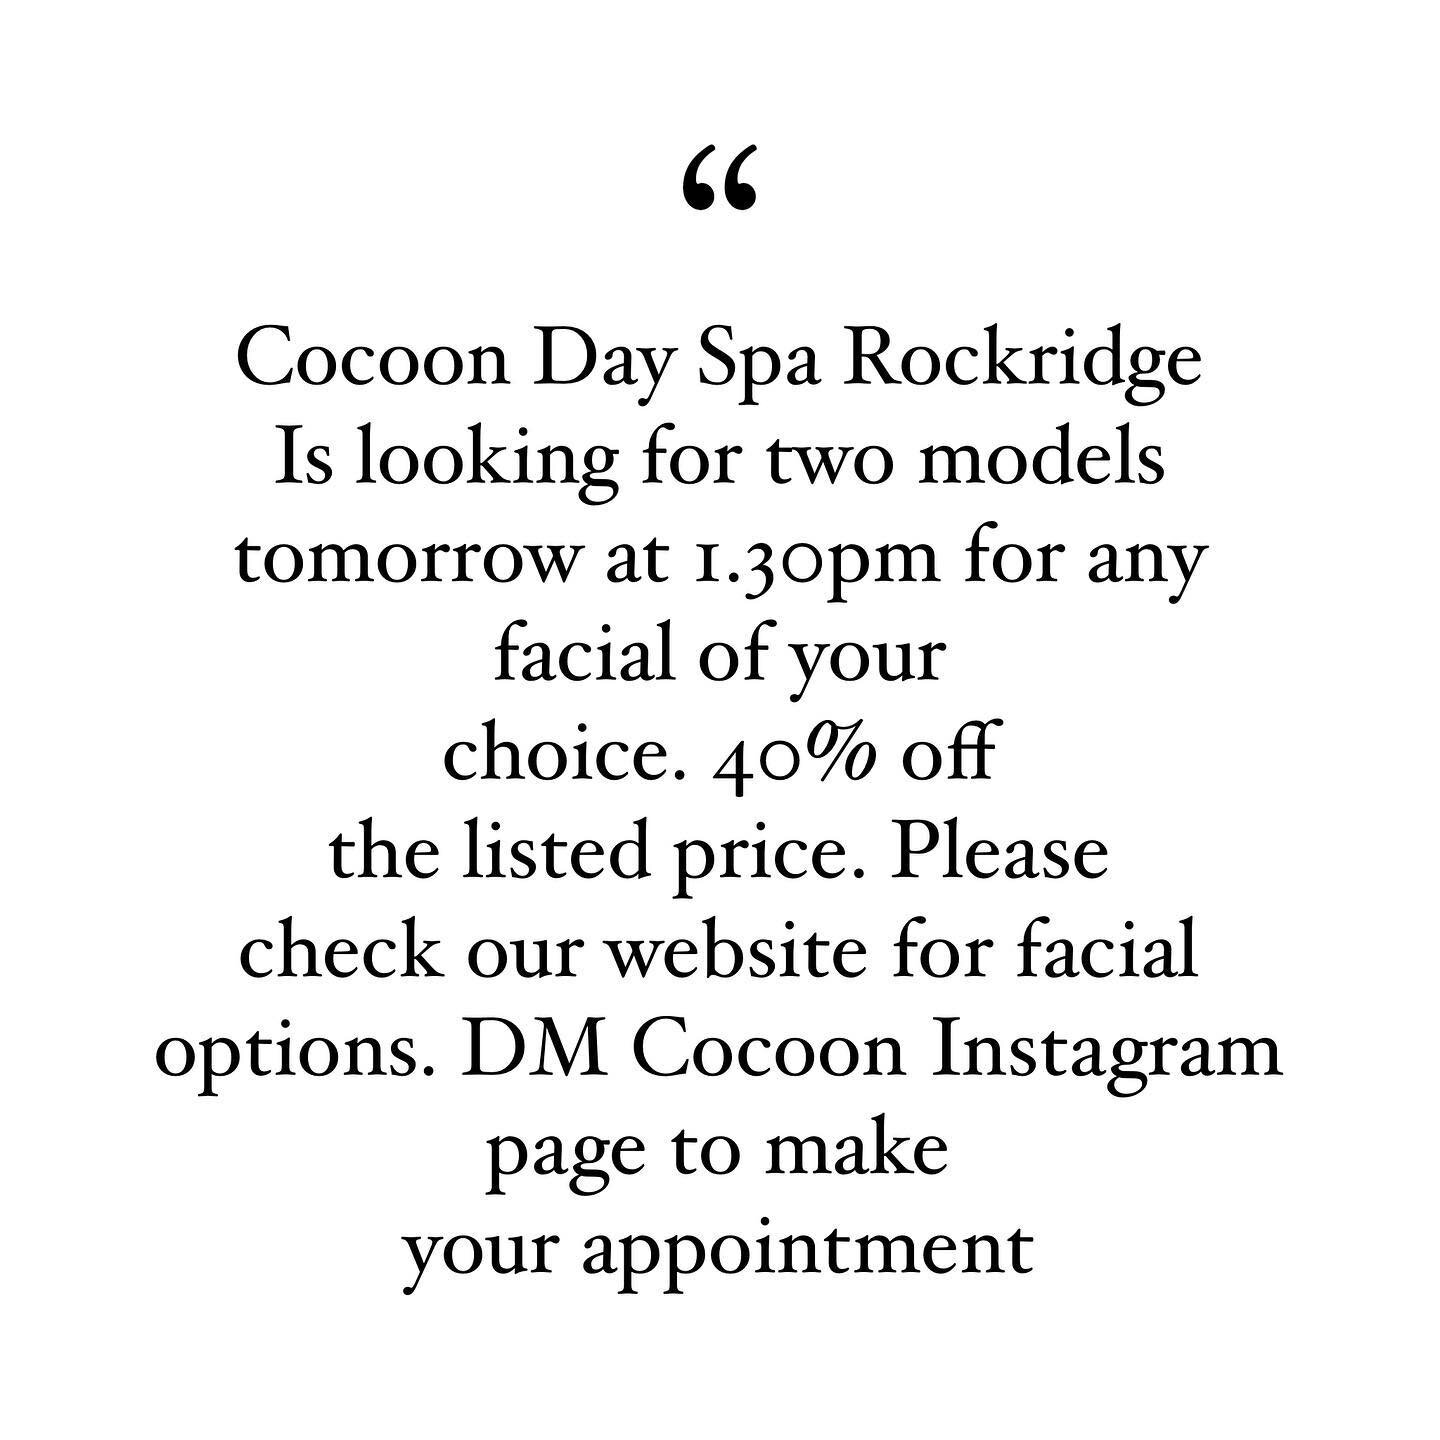 Contact Cocoon for all your beauty needs.